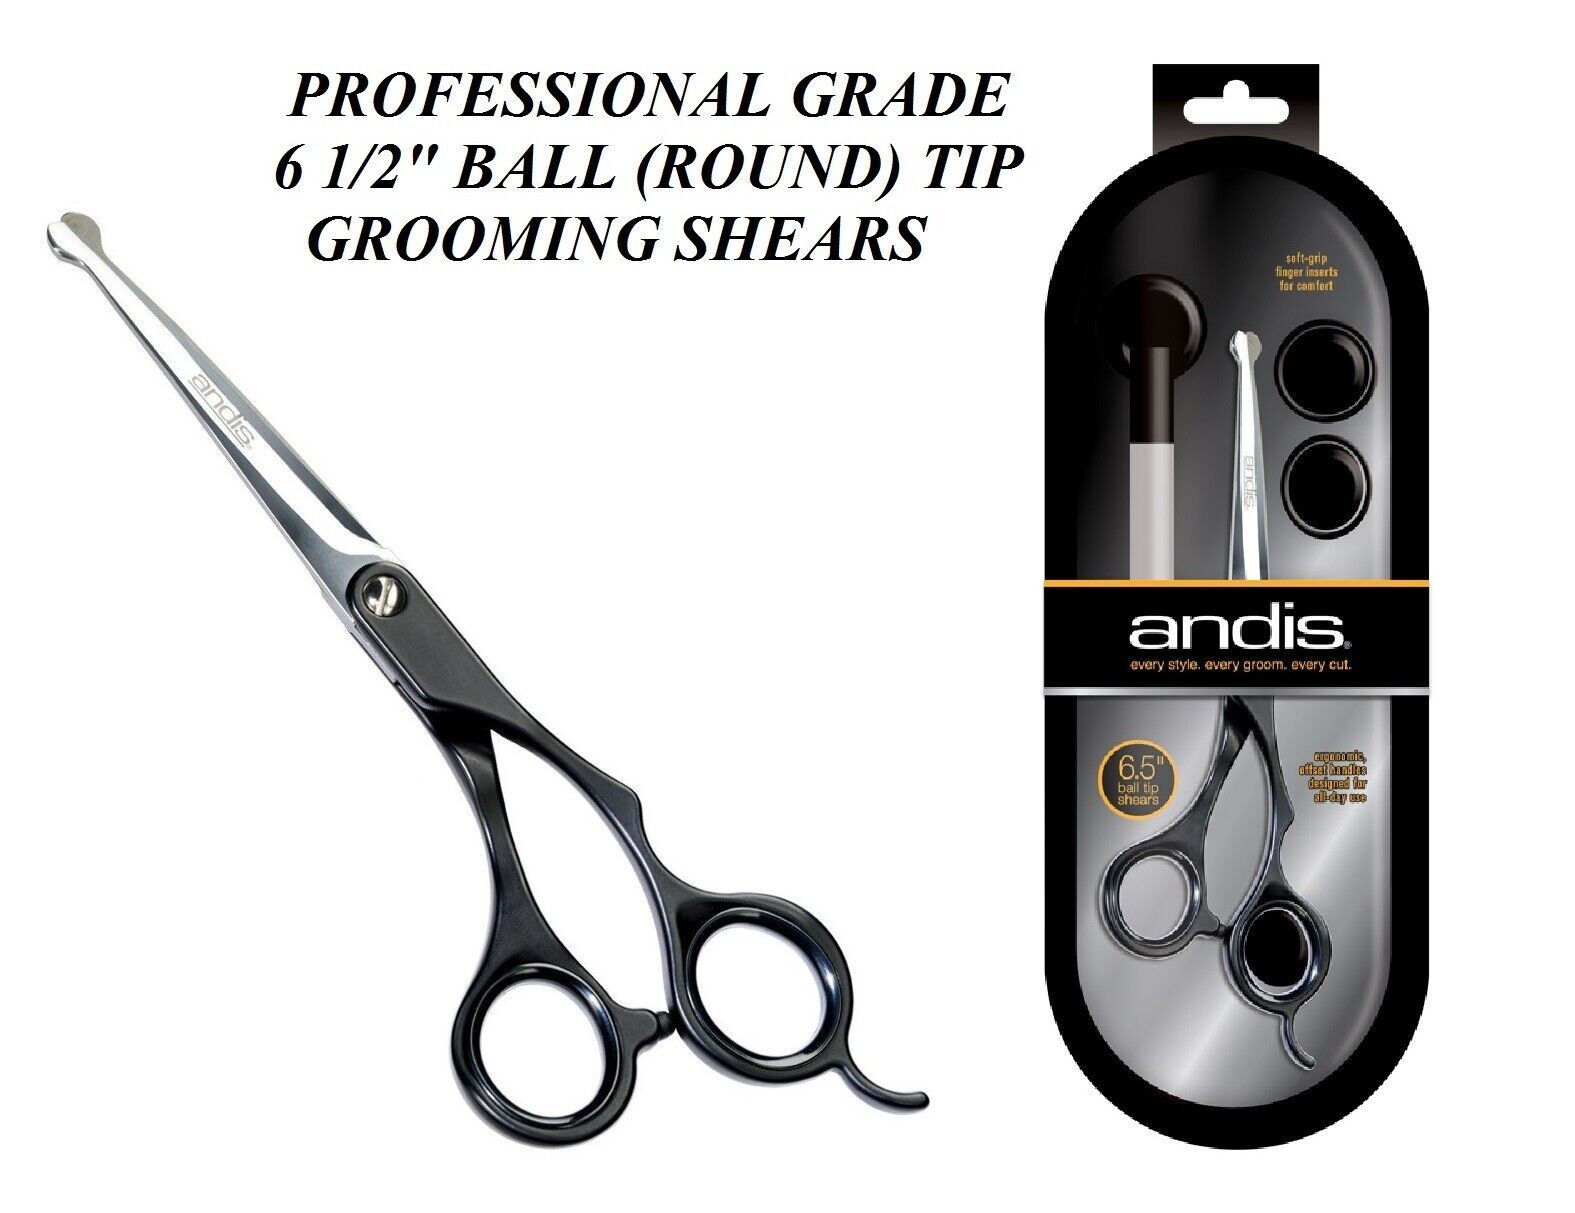 ANDIS Japanese Stainless Steel PRO Grooming 6 1/2" BALL SAFETY Tip SHEAR Scissor - $80.99